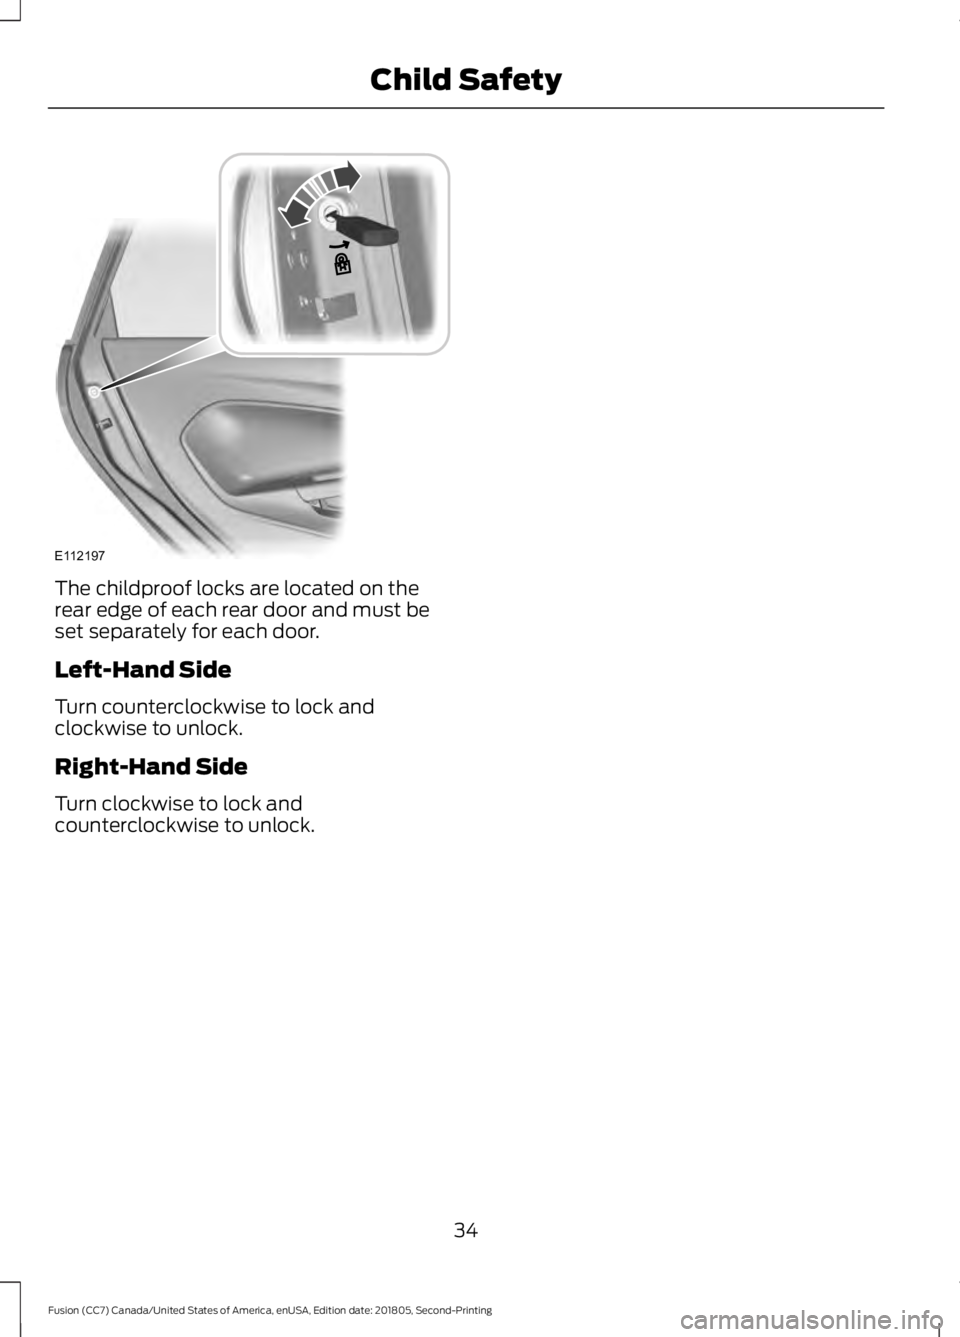 FORD FUSION 2019 User Guide The childproof locks are located on the
rear edge of each rear door and must be
set separately for each door.
Left-Hand Side
Turn counterclockwise to lock and
clockwise to unlock.
Right-Hand Side
Turn